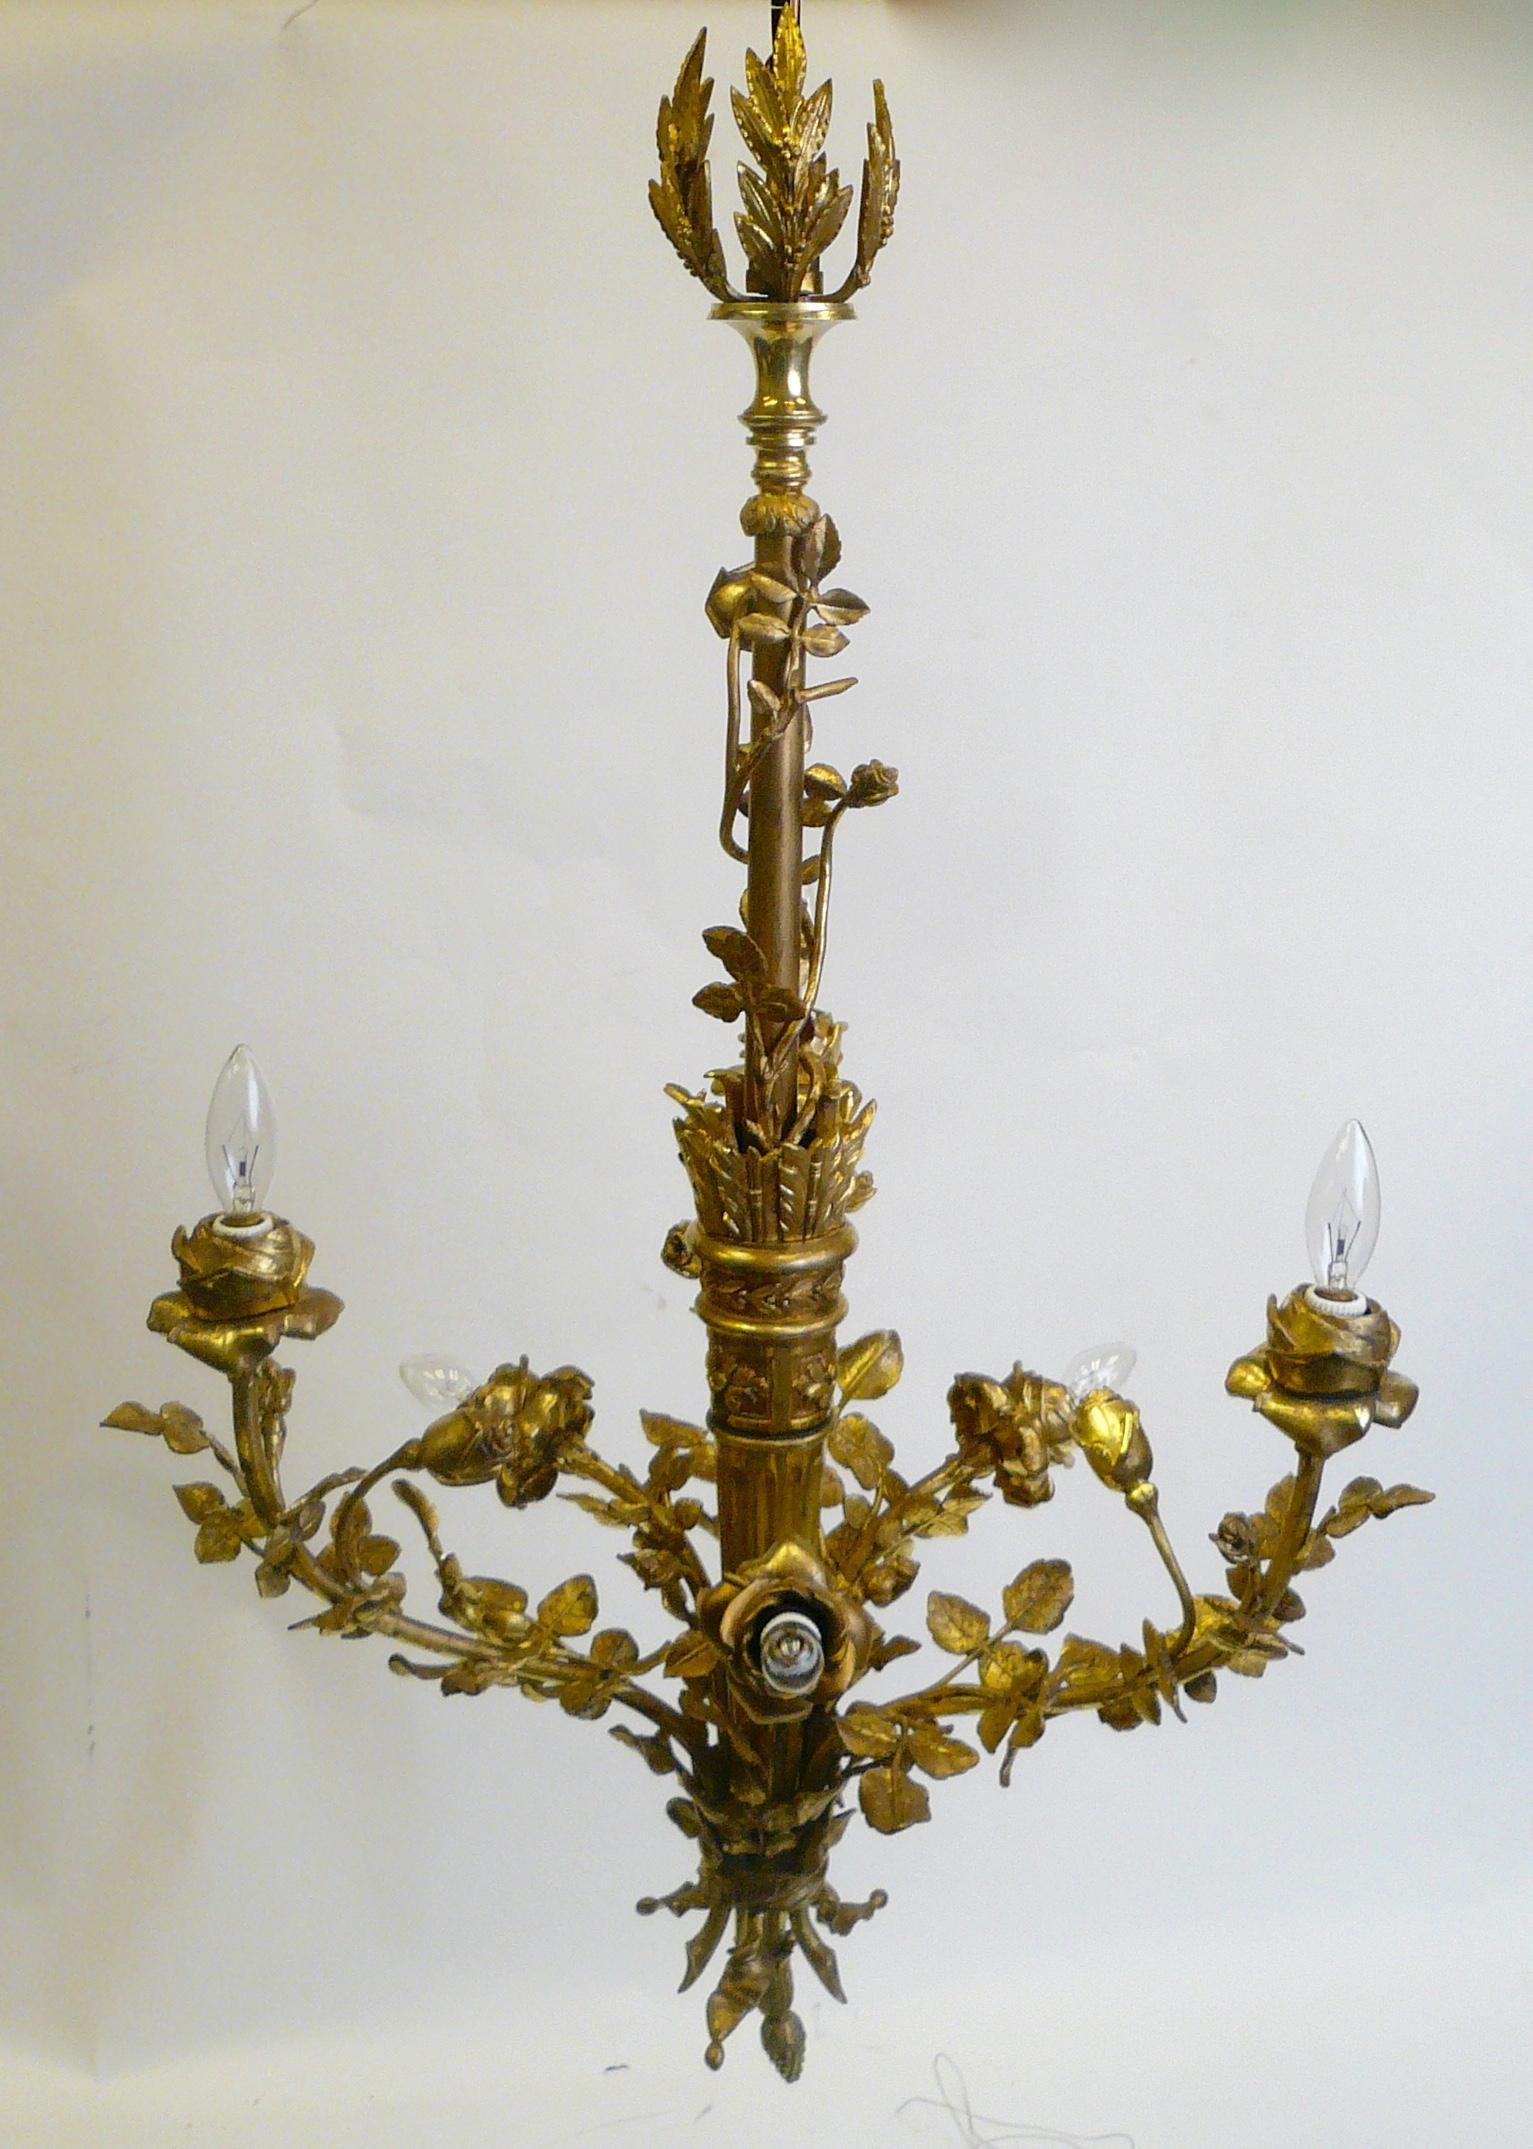 This neoclassical style hanging fixture features naturalistic rose branches emanating from a gilt bronze quiver.